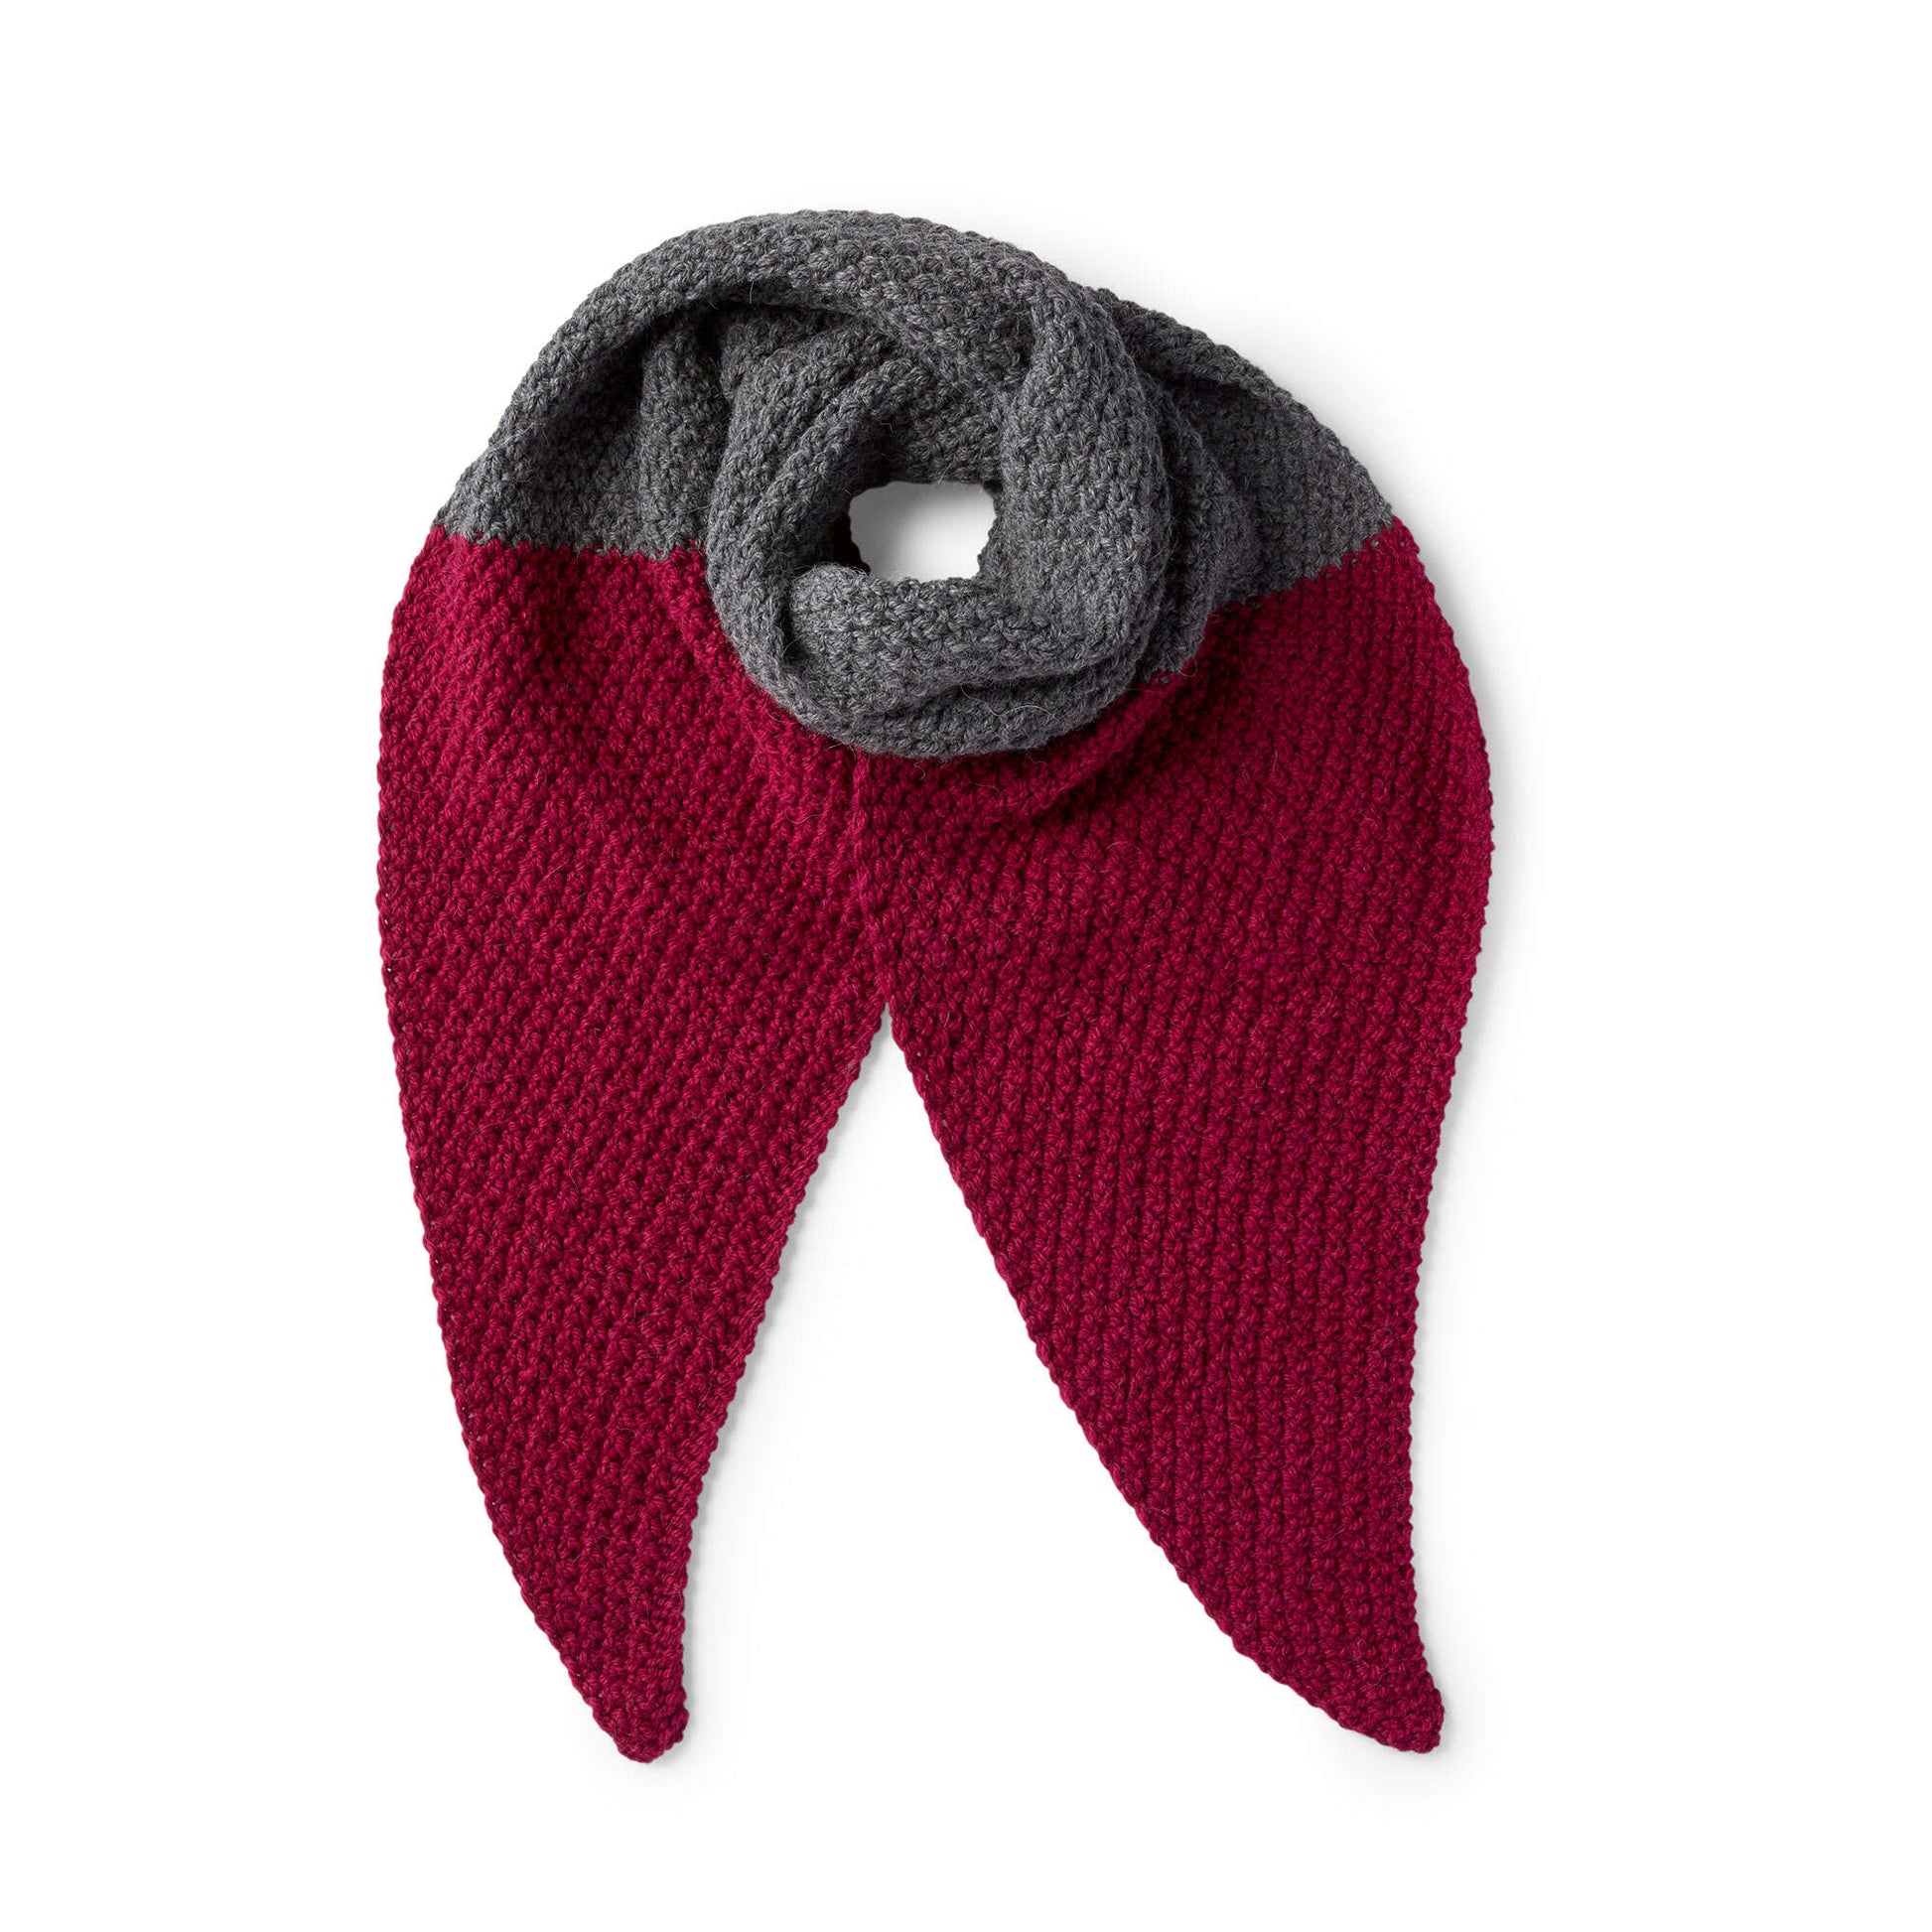 Free Red Heart Knit Duo Scarf Pattern